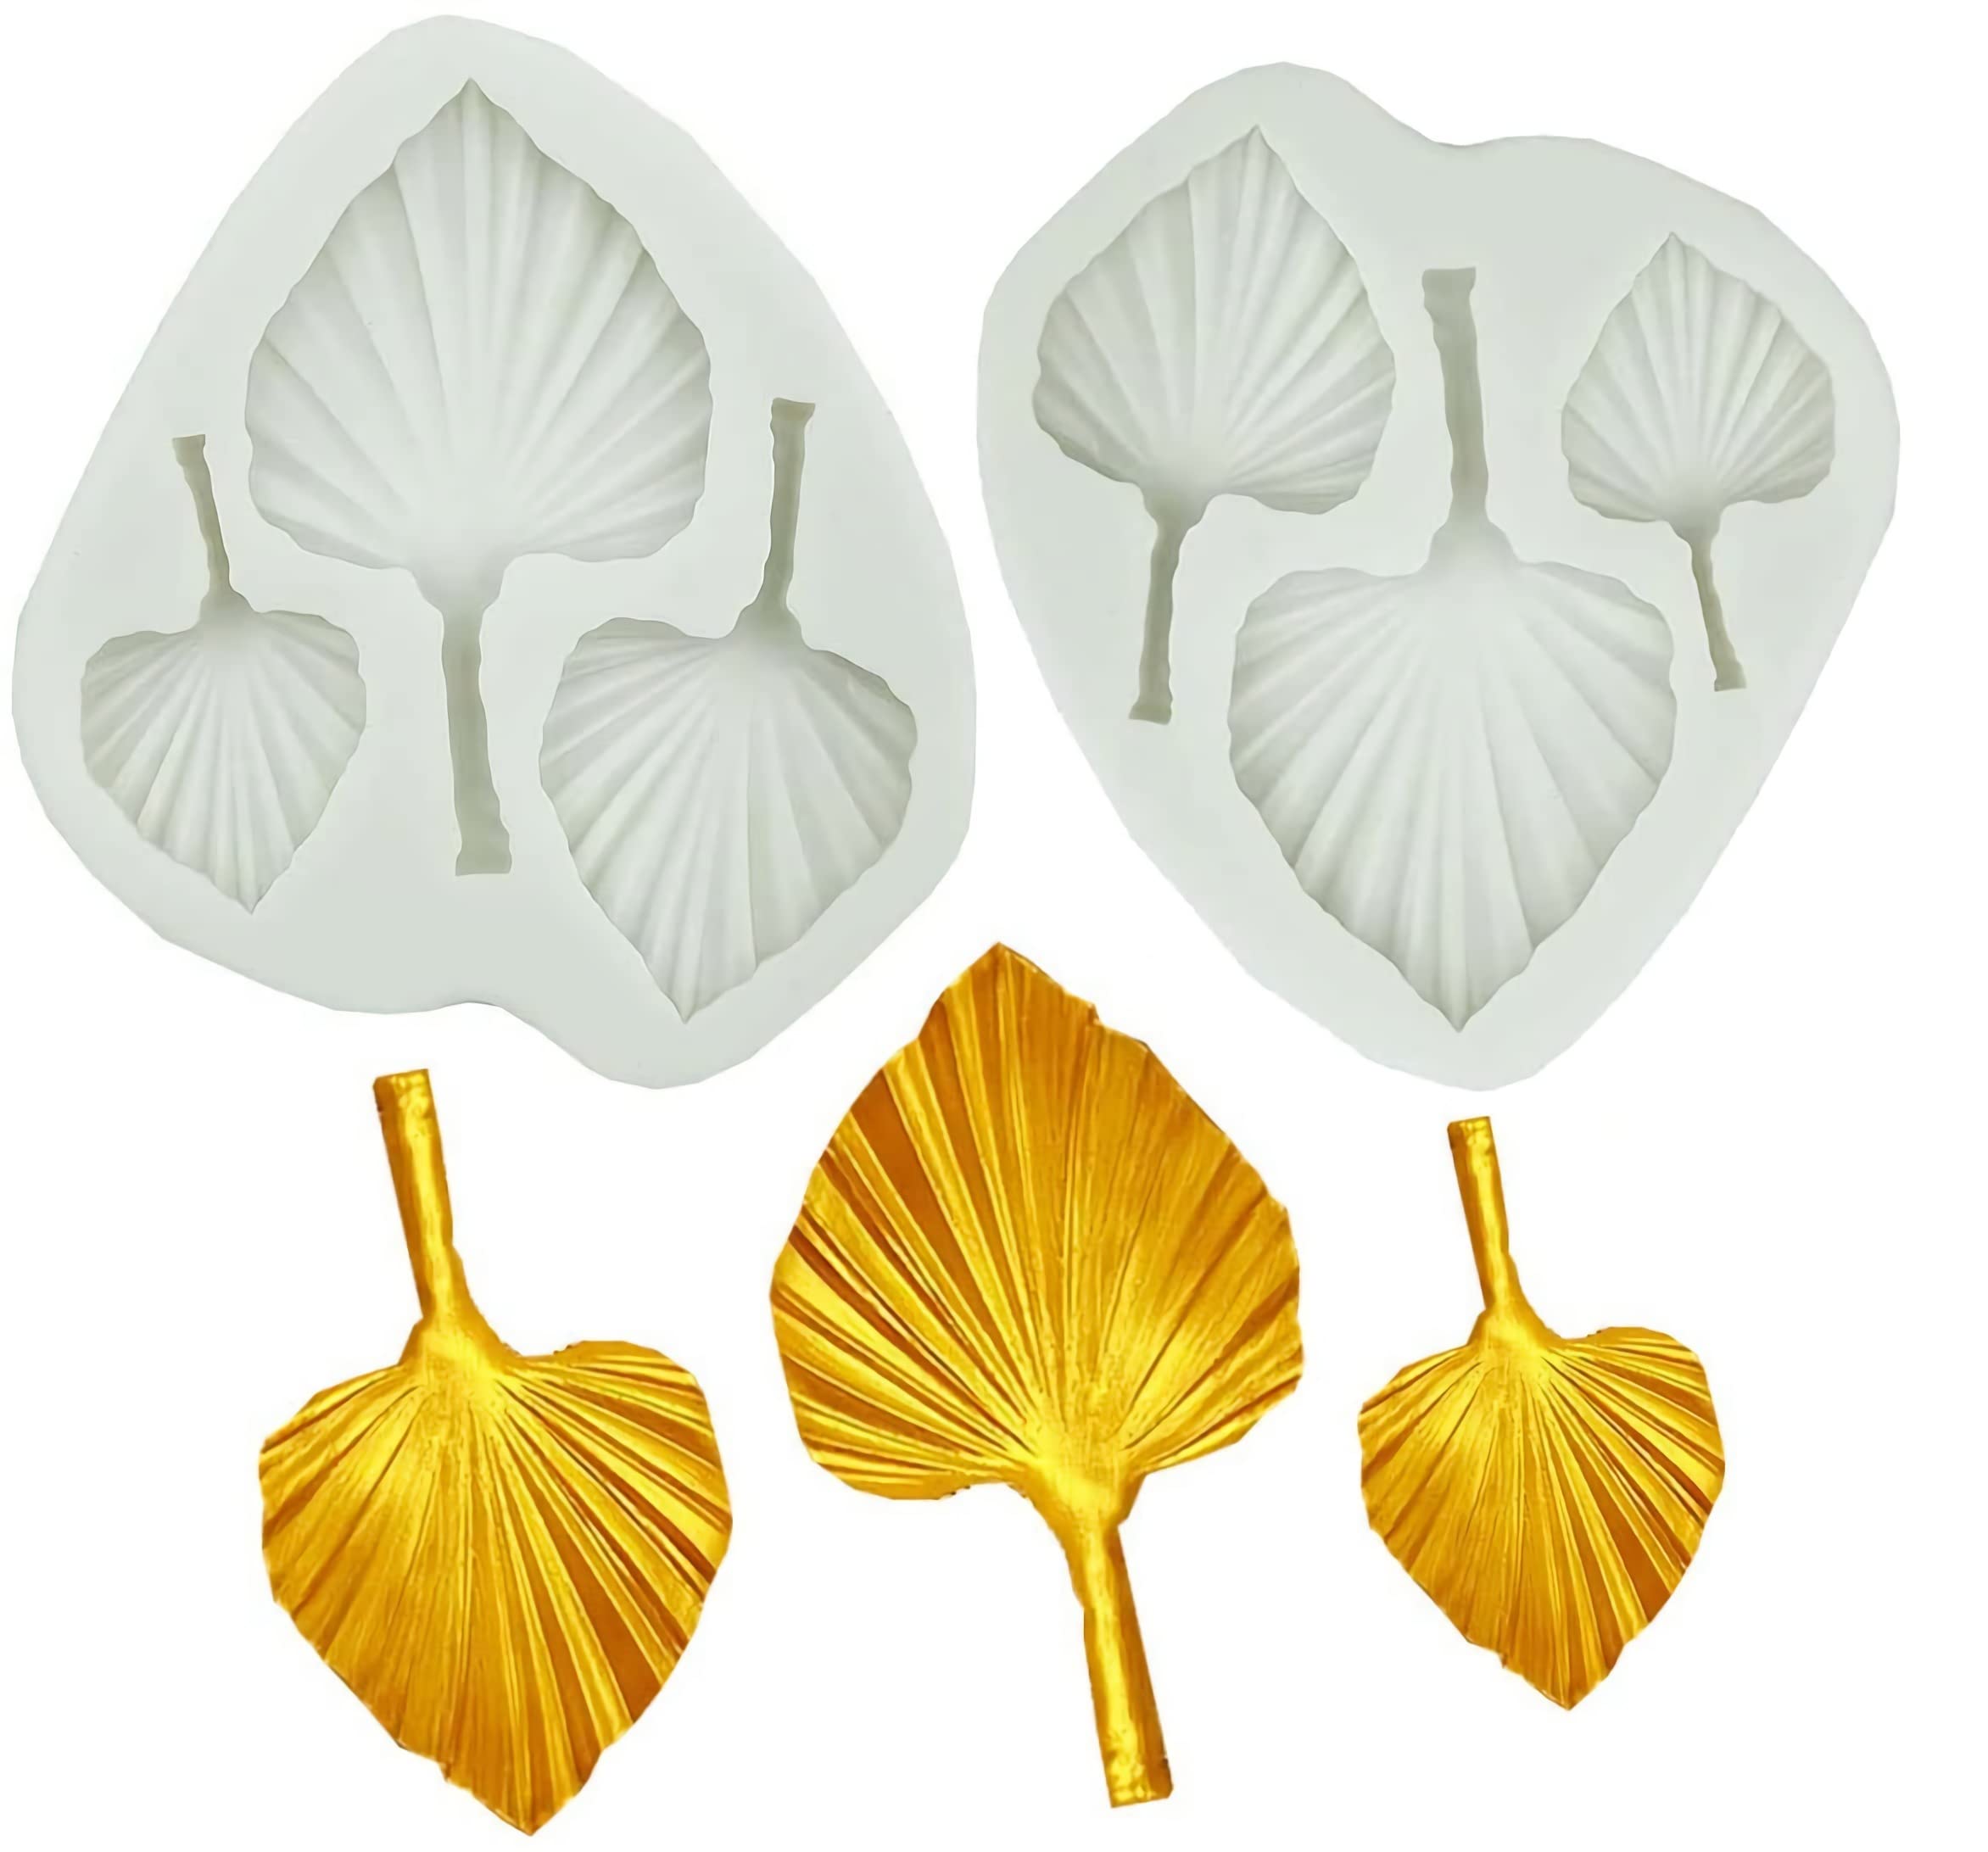 HKACSTHI 5 Pieces Fan Leaf Mold Palm Leaves Mold Pearl Sphere Mold Boho Mold Candy Molds Silicone Fondant Mold Clay Mold for Crafts